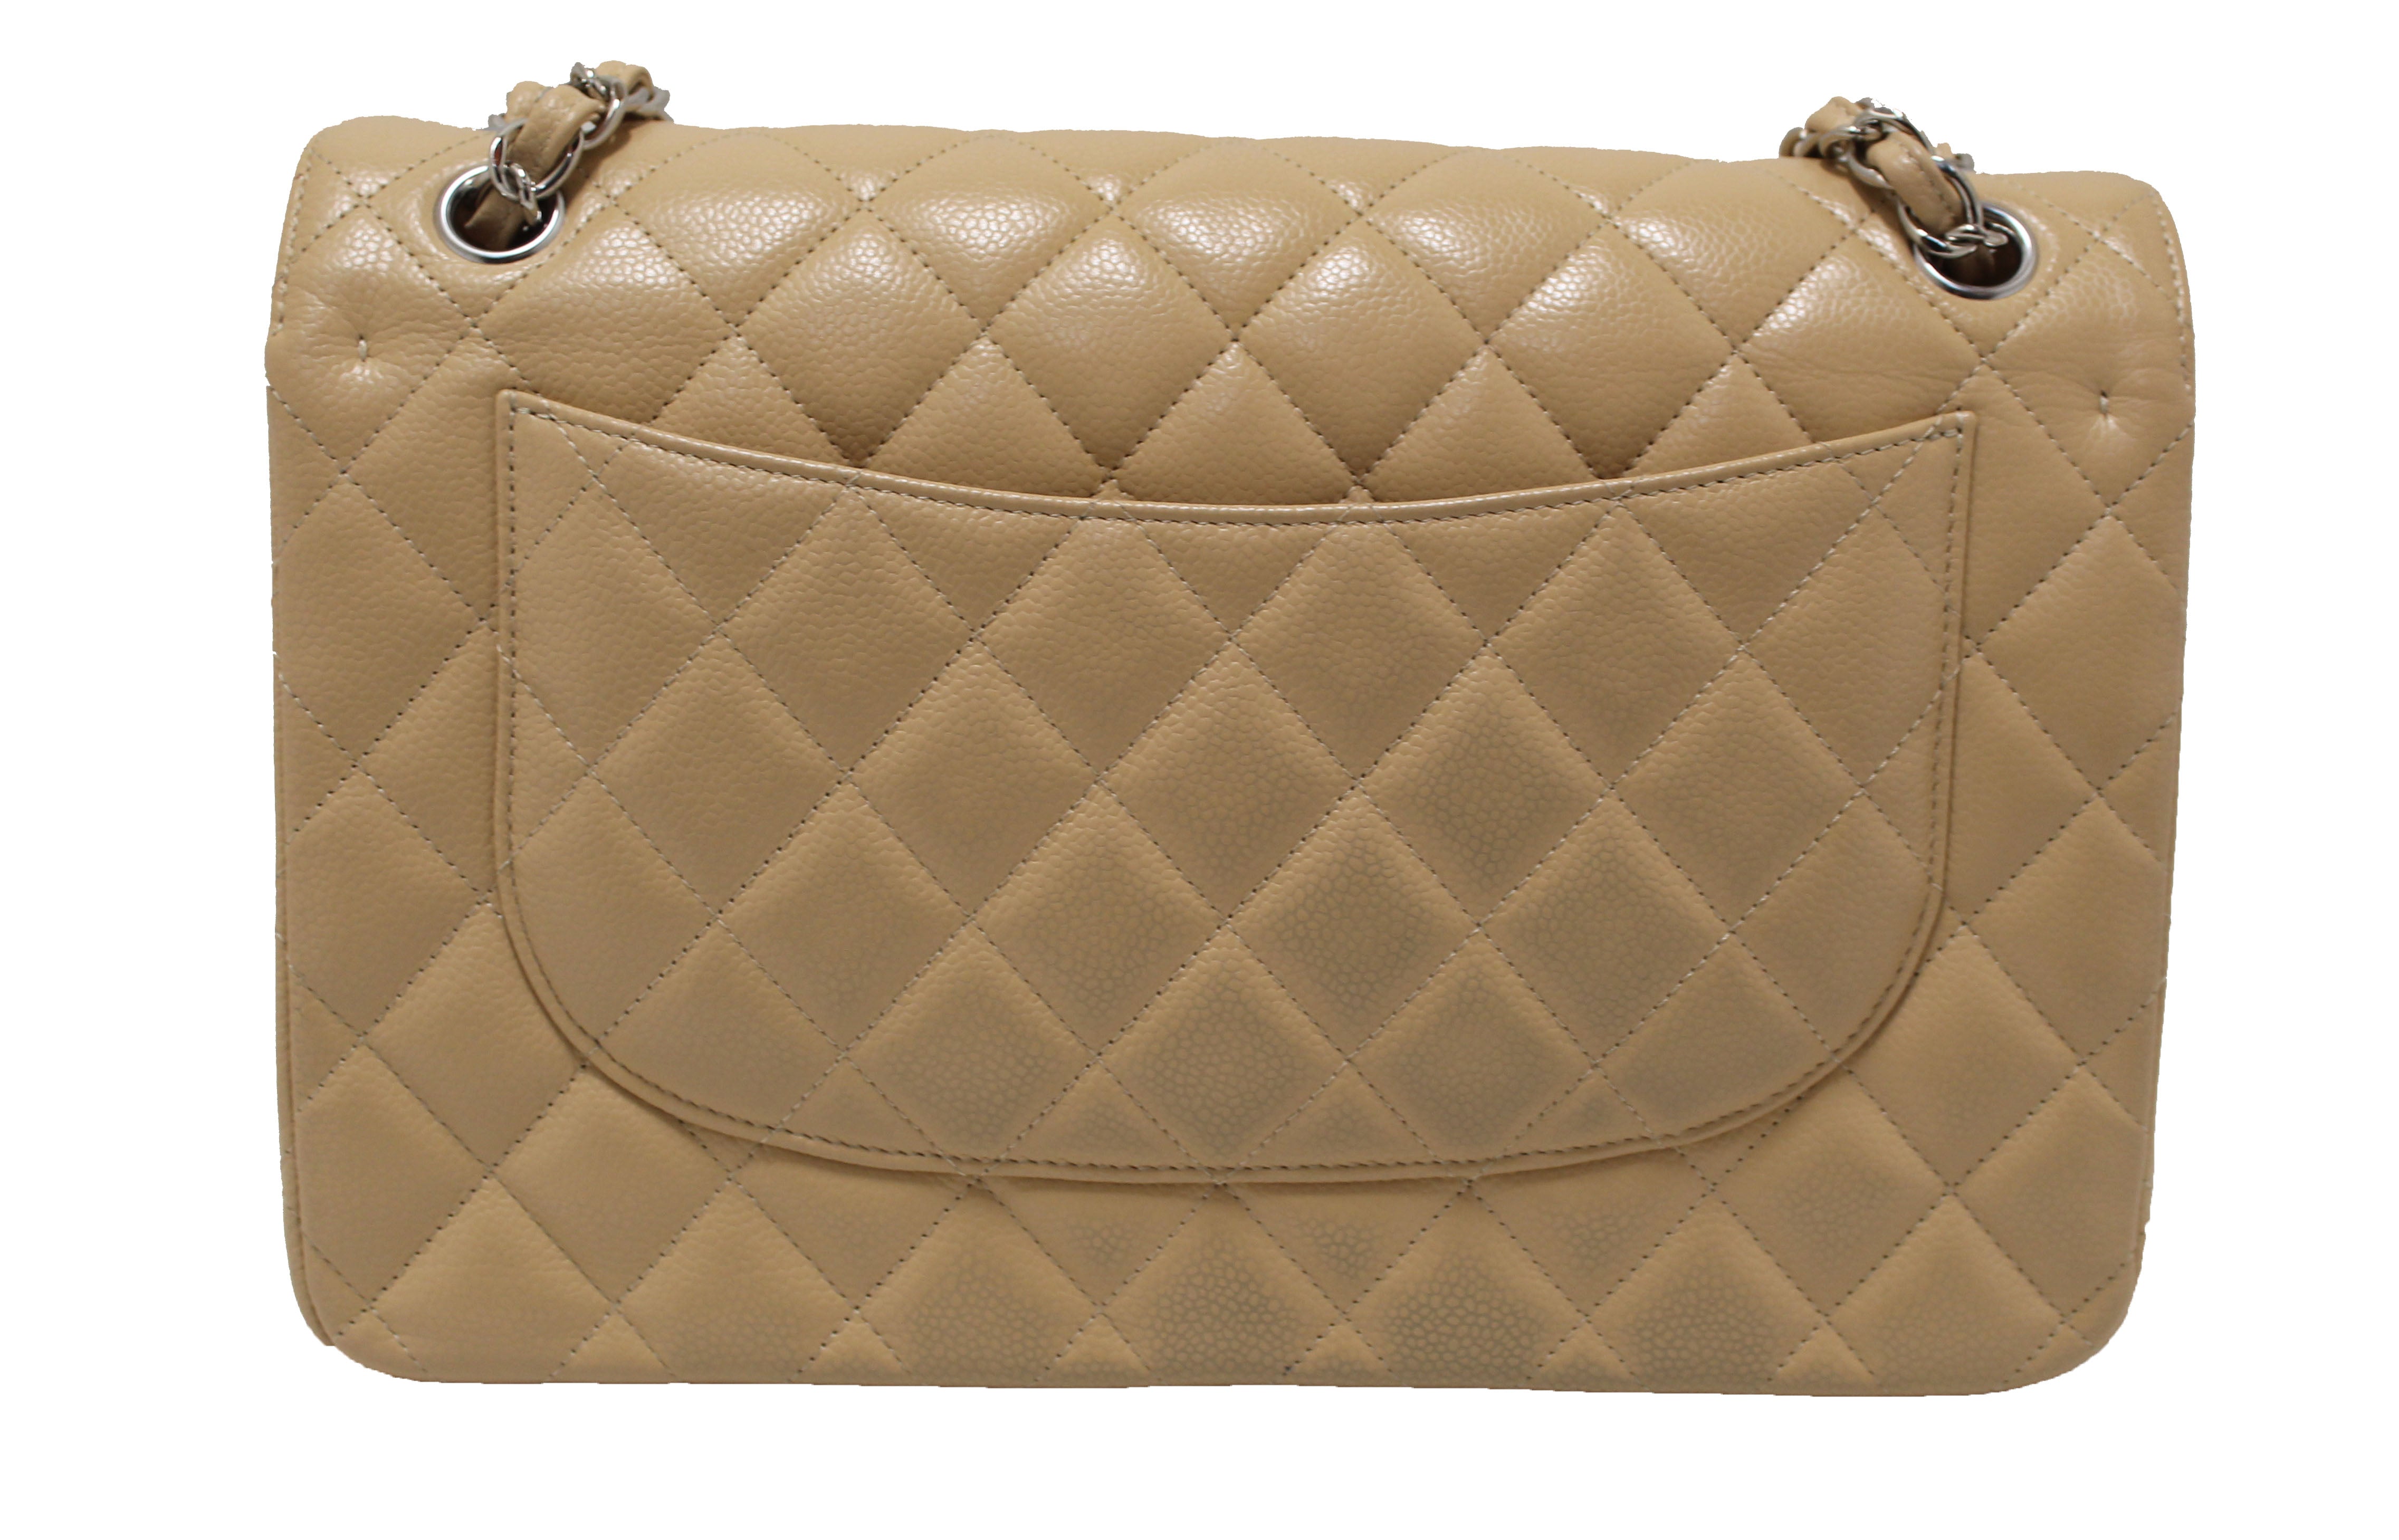 Authentic Chanel Beige Quilted Caviar Leather Classic Jumbo Double Flap Bag